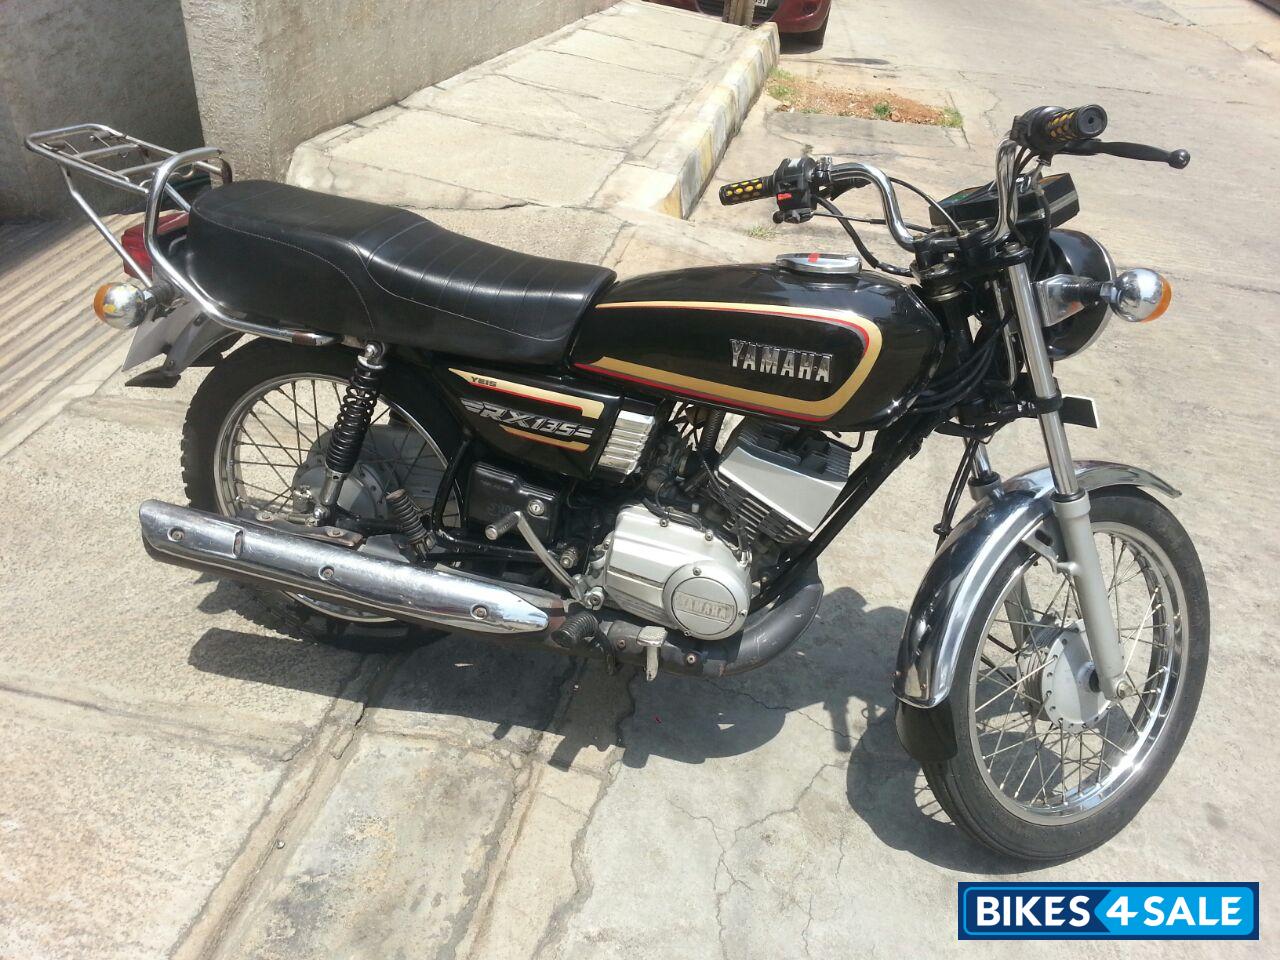 Used 2003 Model Yamaha Rx 135 For Sale In Bangalore Id 166855